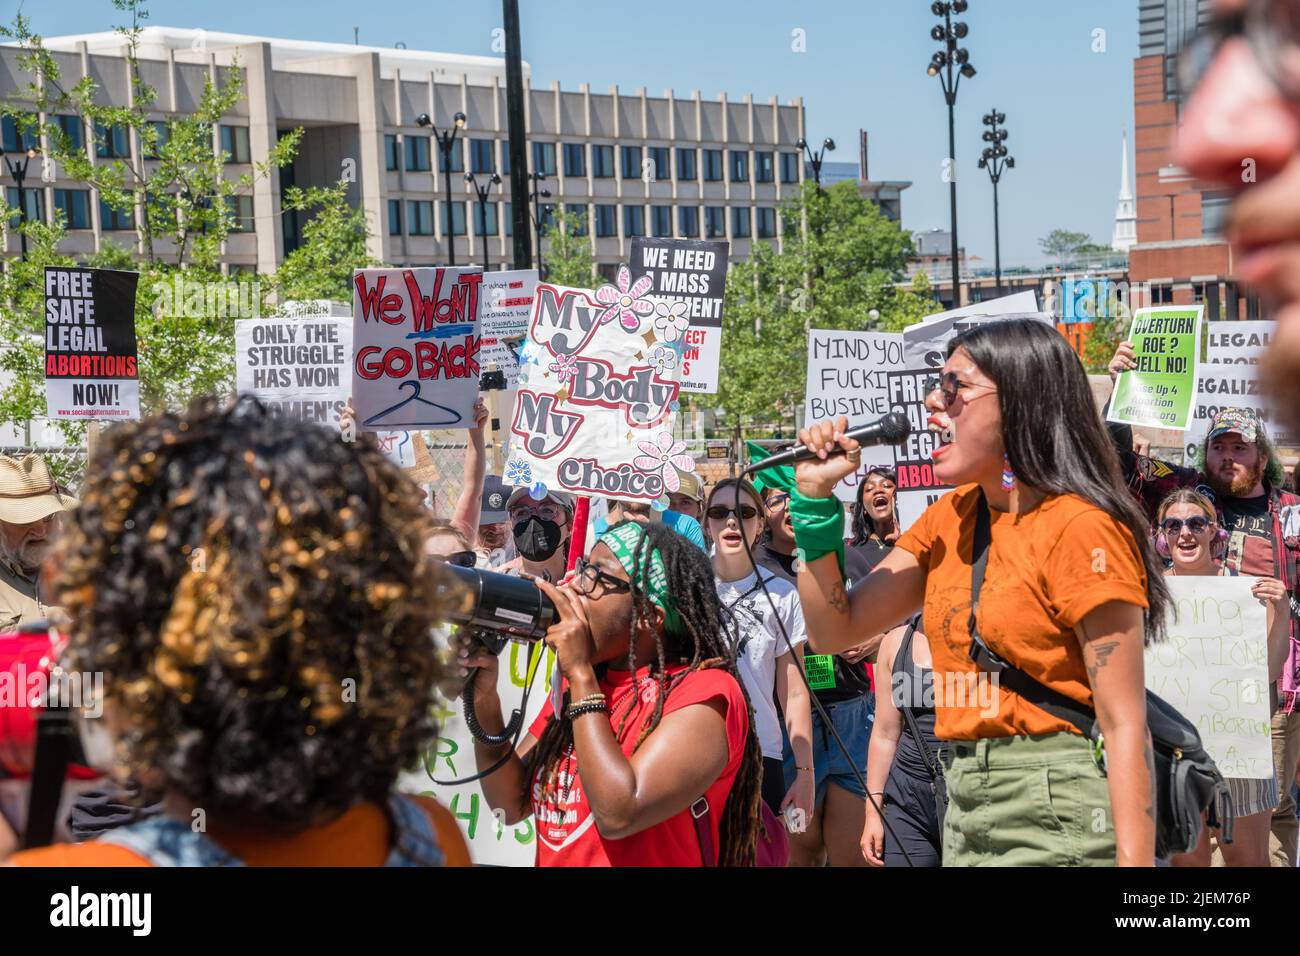 Young hispanic woman speaking to protesters holding pro-abortion signs at demonstration against the Supreme Court ruling overturning Roe v. Wade. Stock Photo